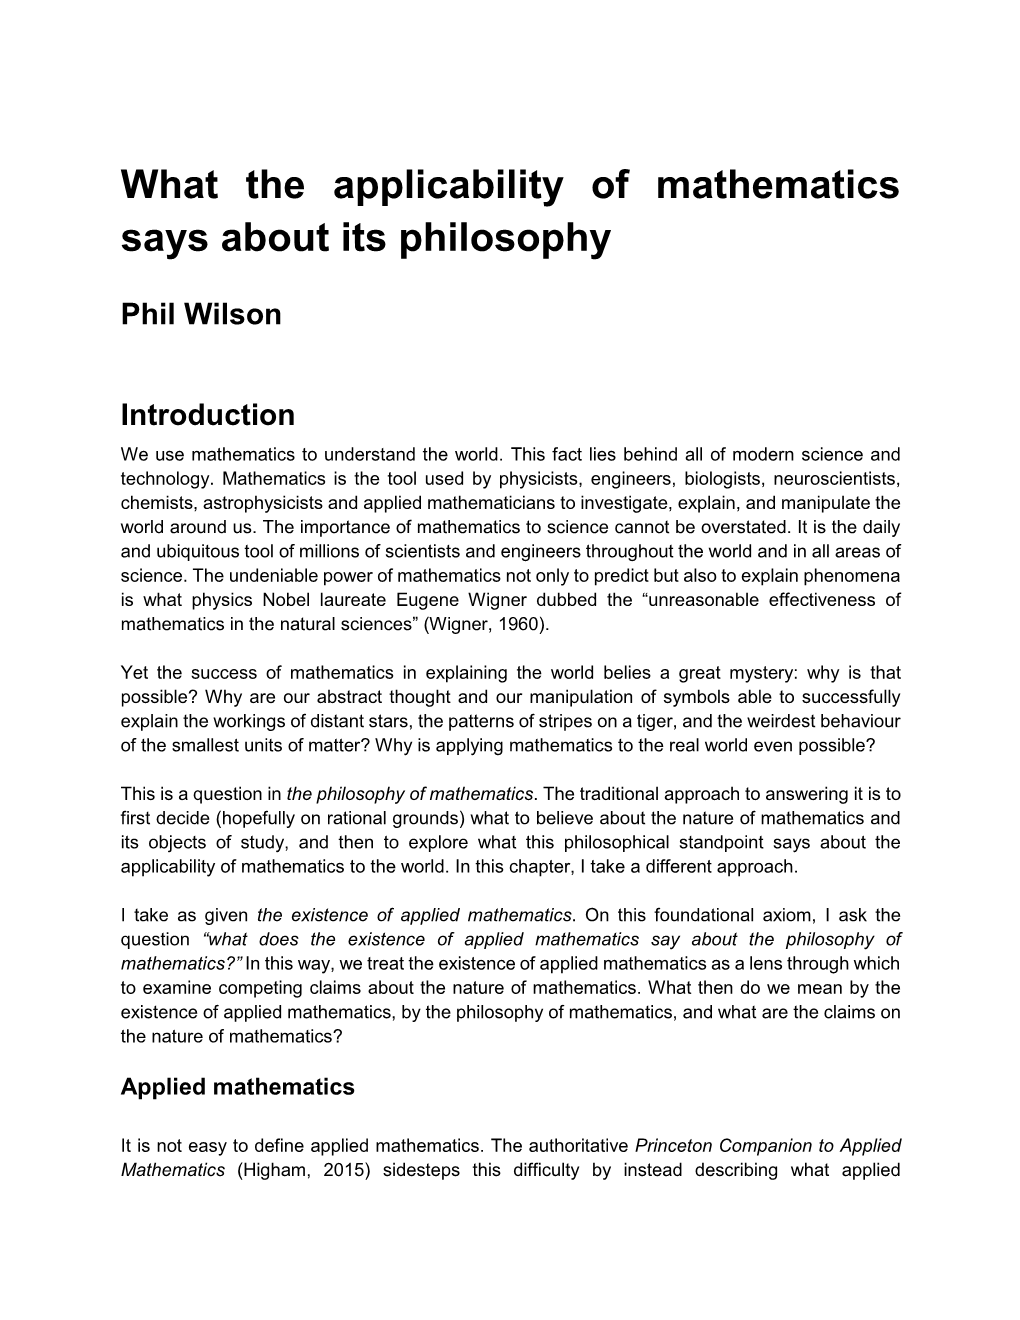 What the Applicability of Mathematics Says About Its Philosophy